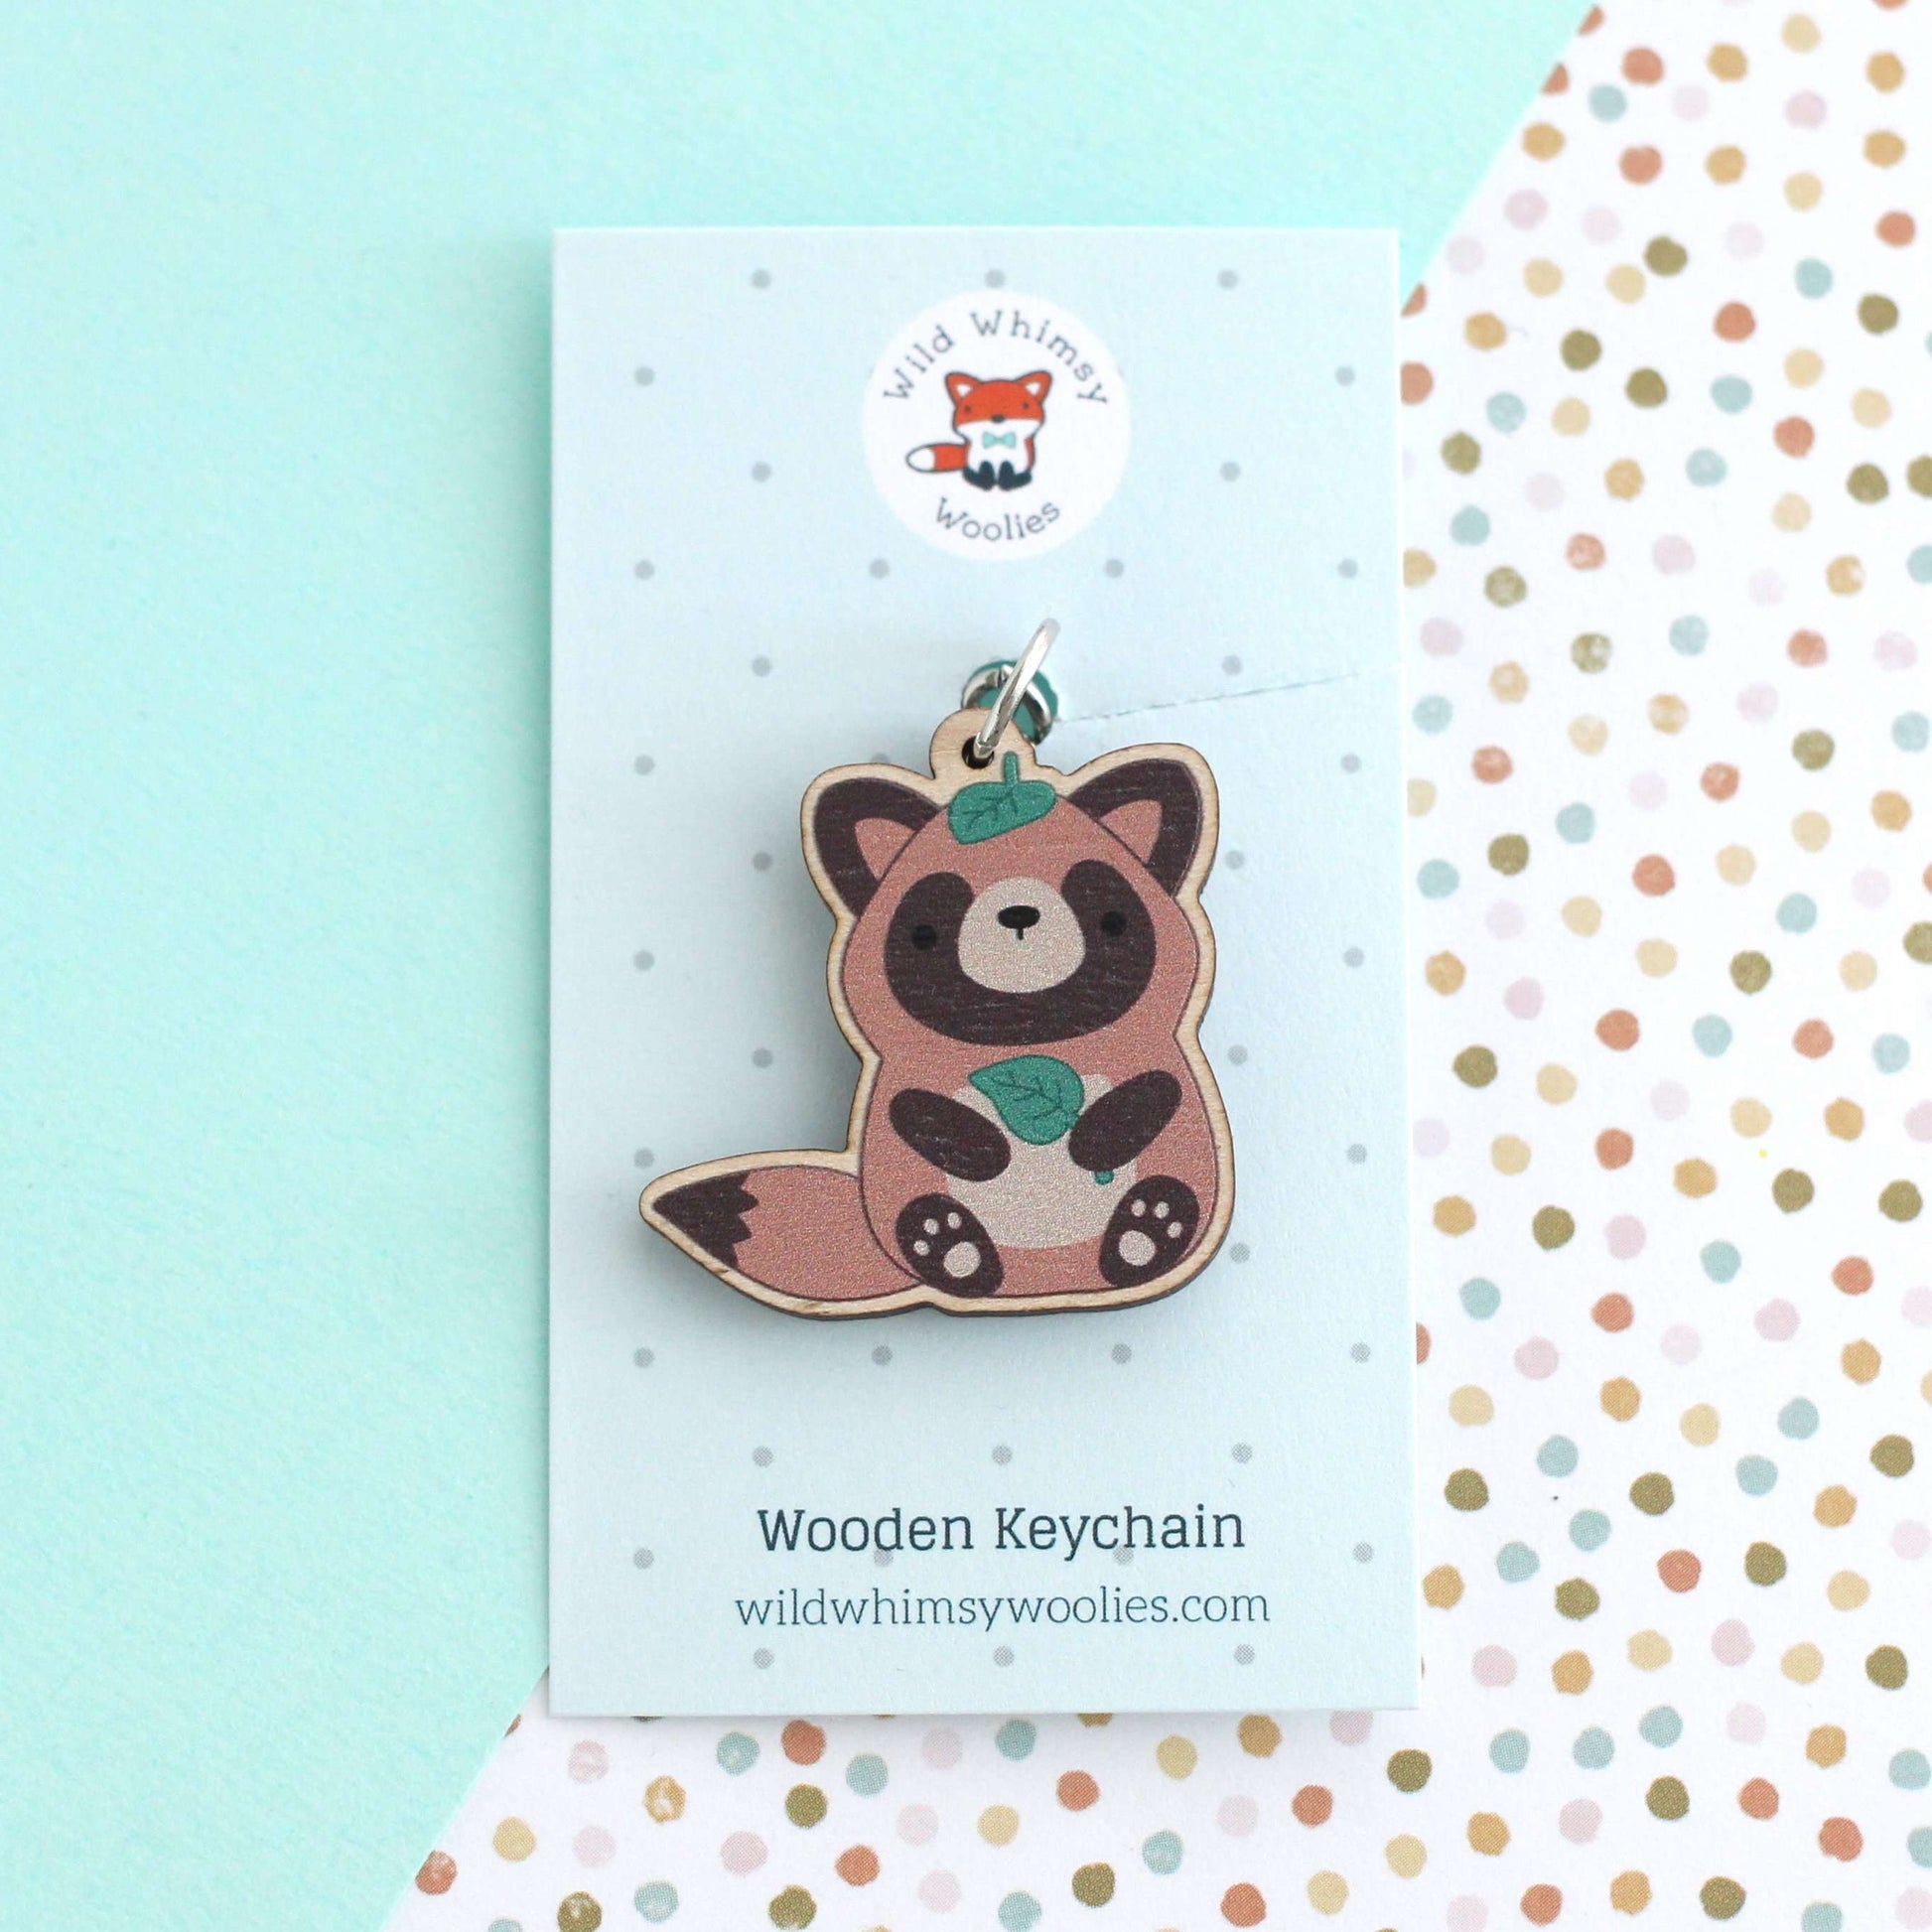 Tanuki Wooden Keychain - Japanese Raccoon Dog - Sustainable Gift by Wild Whimsy Woolies